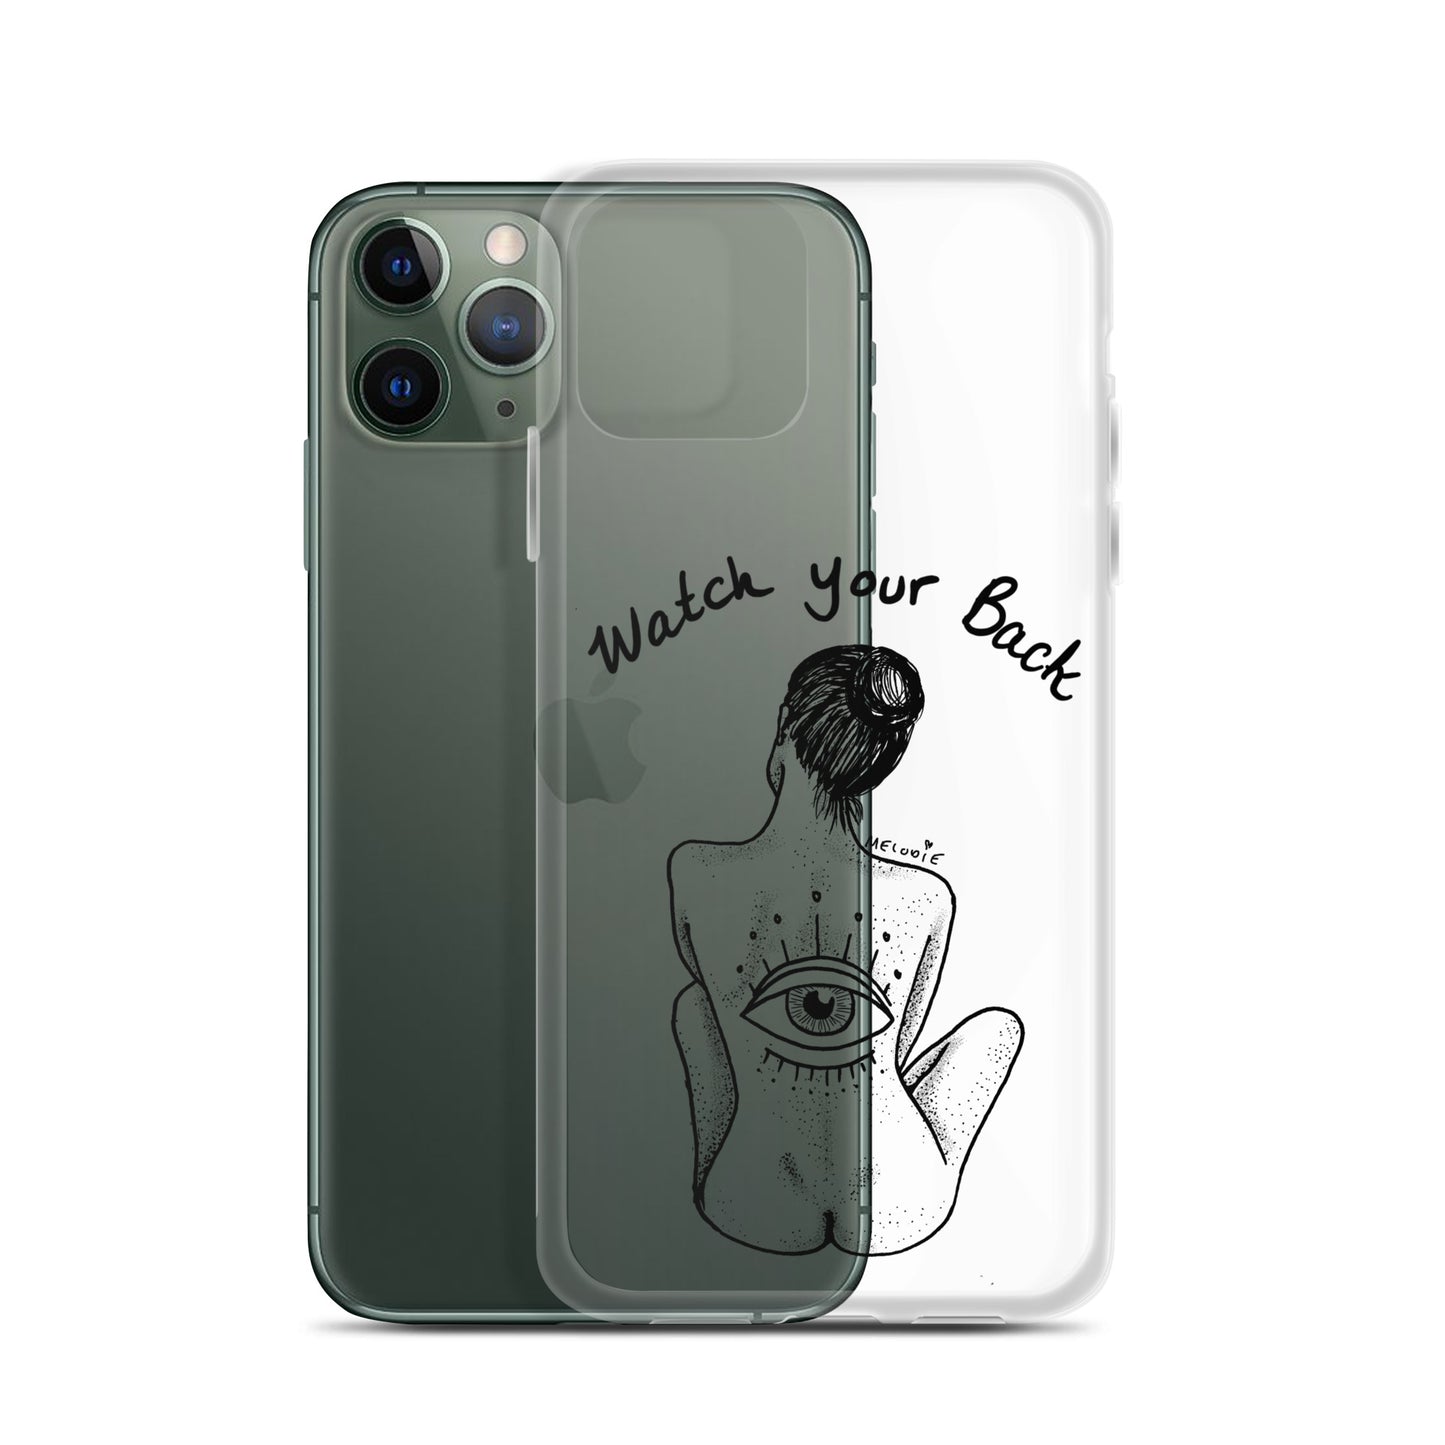 " Watch Your Back " Clear Case for iPhone®